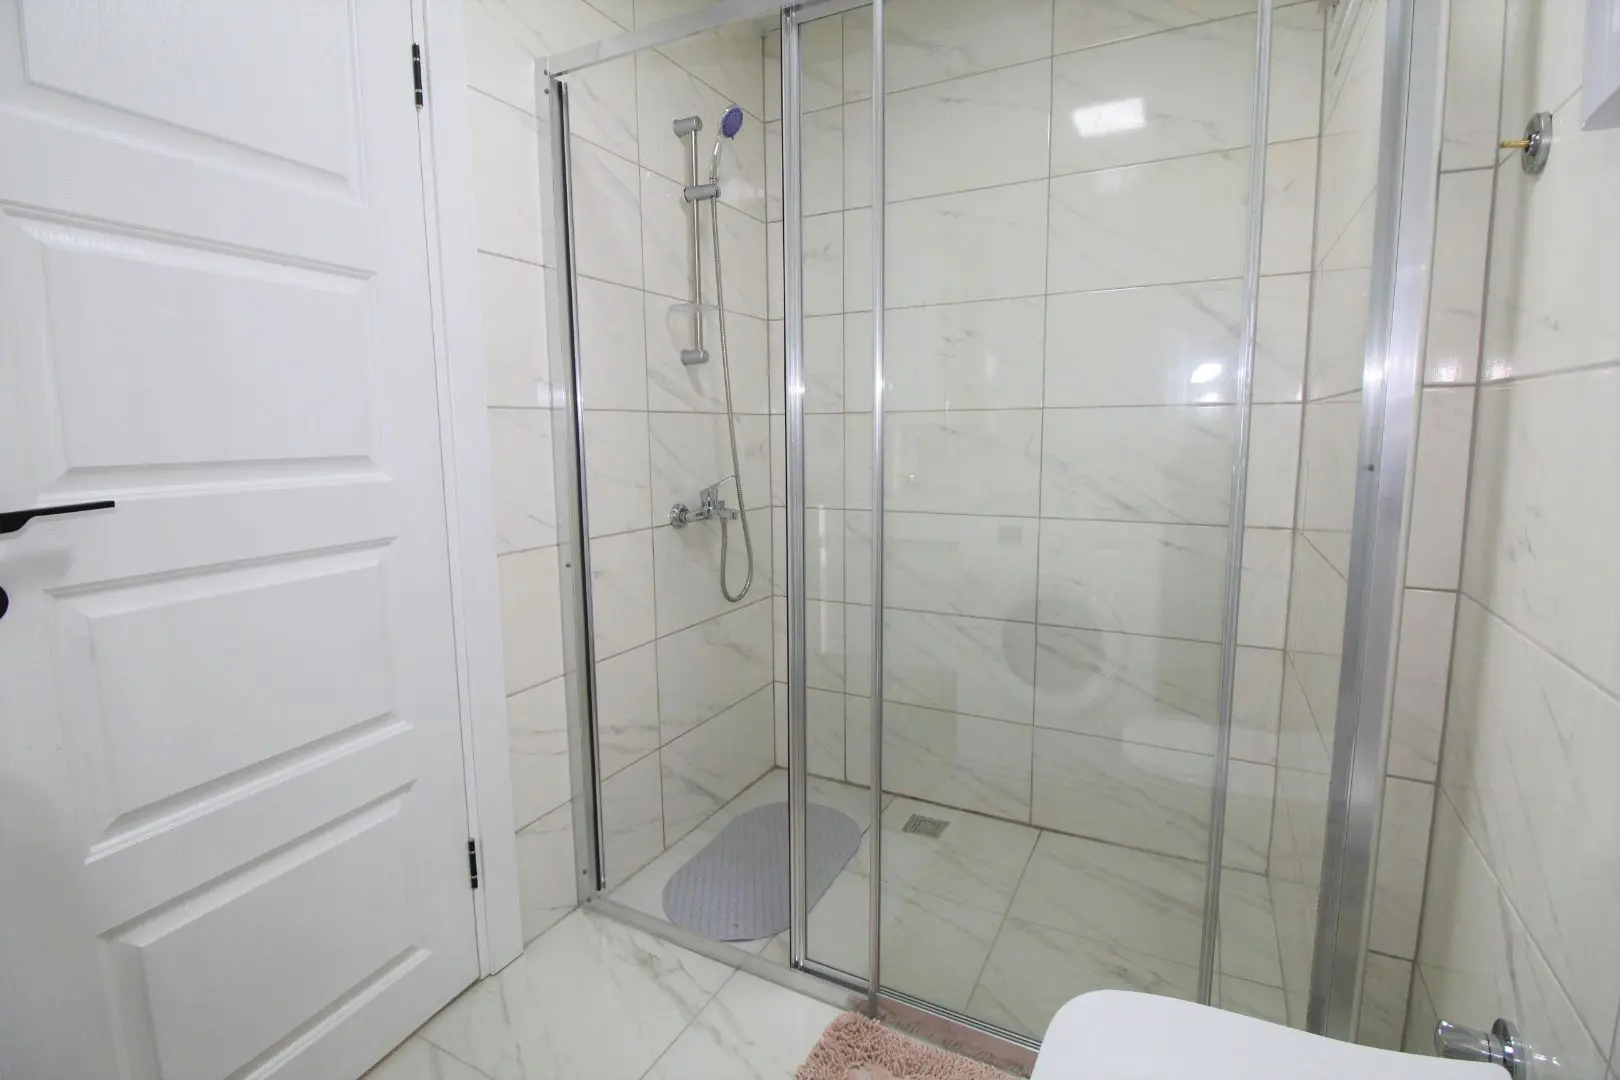 NEW FULLY FURNISHED 1+1 FLAT FOR RENT IN KARGICAK, ALANYA